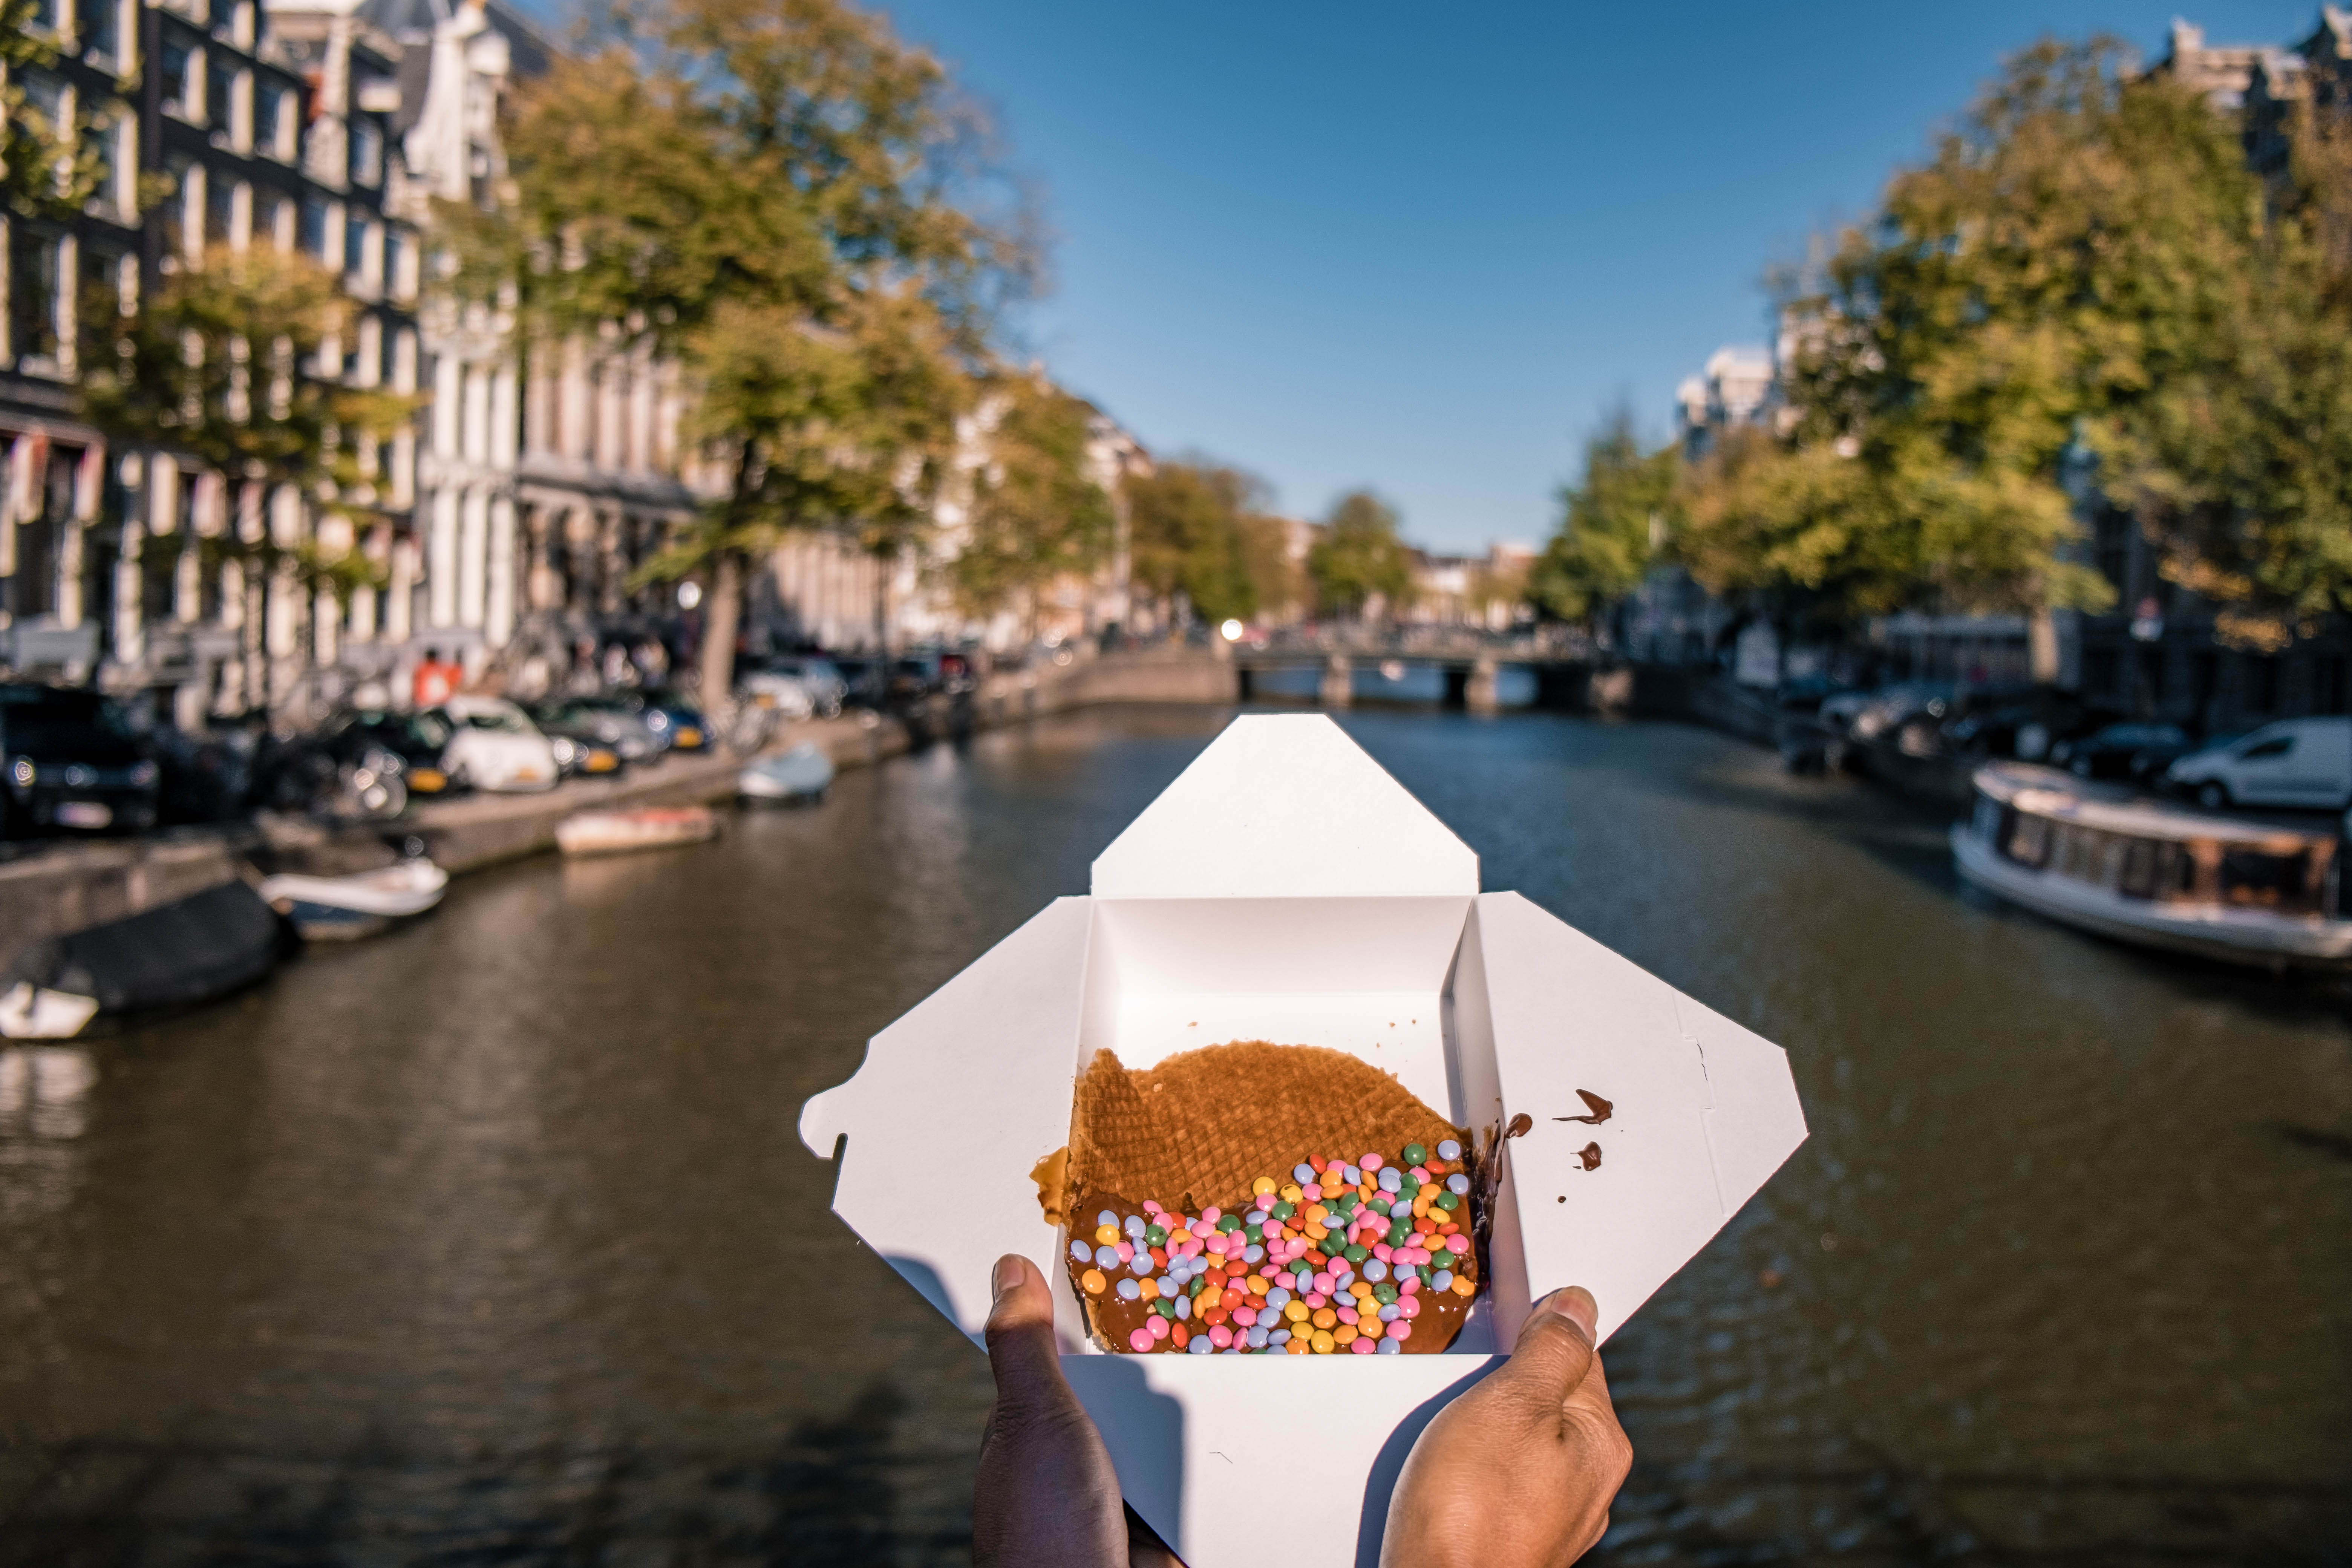 woman hand with Stroopwafel in Amsterdam - typical Dutch food - two circular pieces of waffle filled with caramel-like syrup.